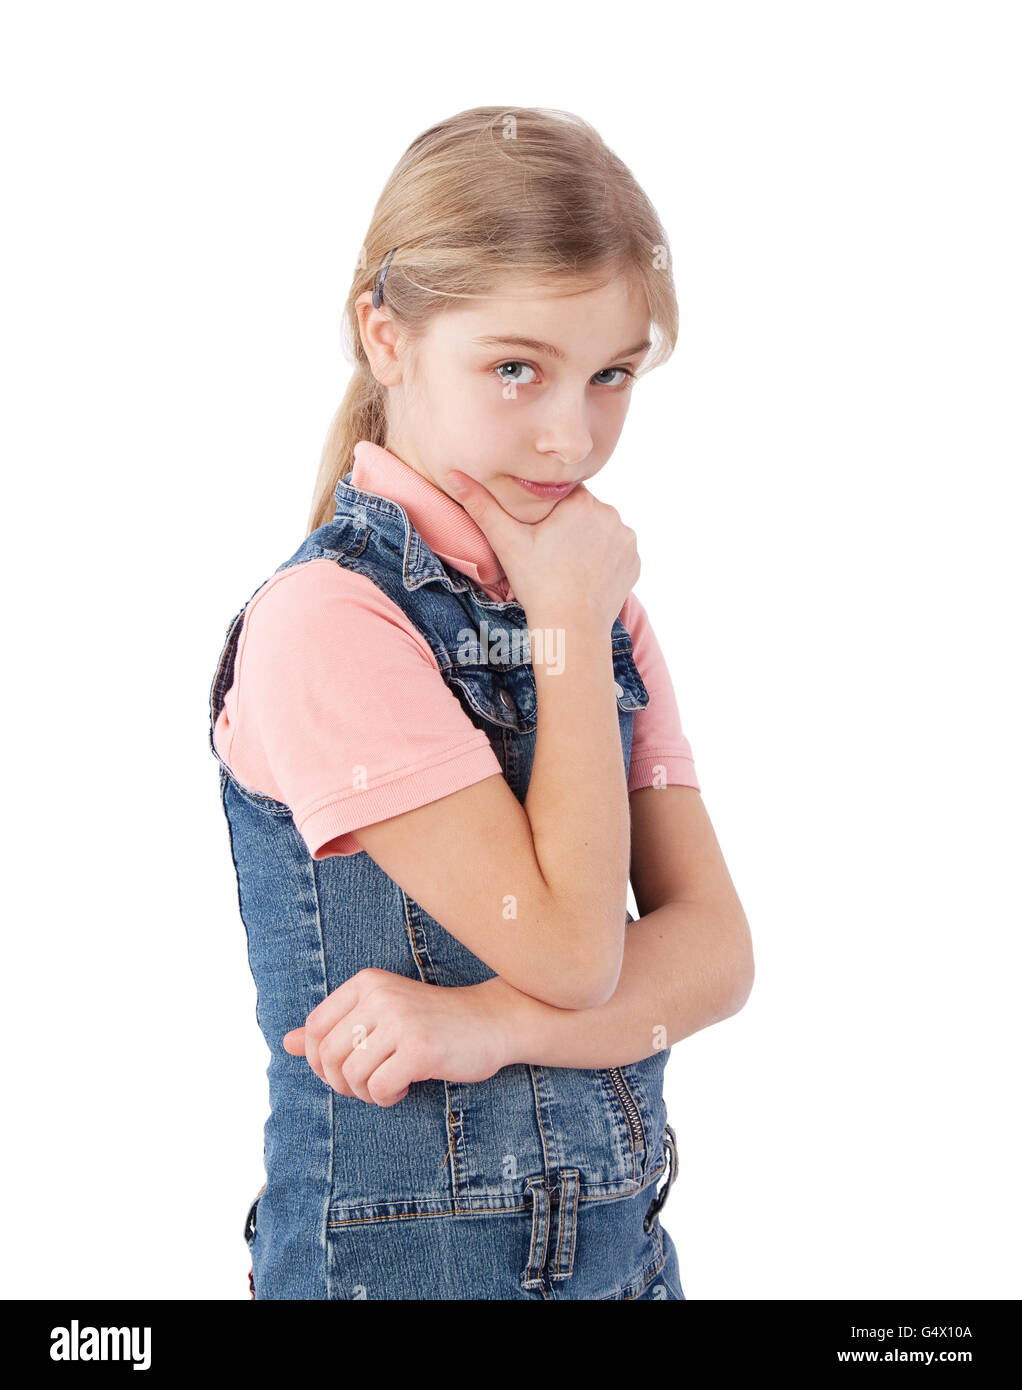 young girl with hand on chin Stock Photo